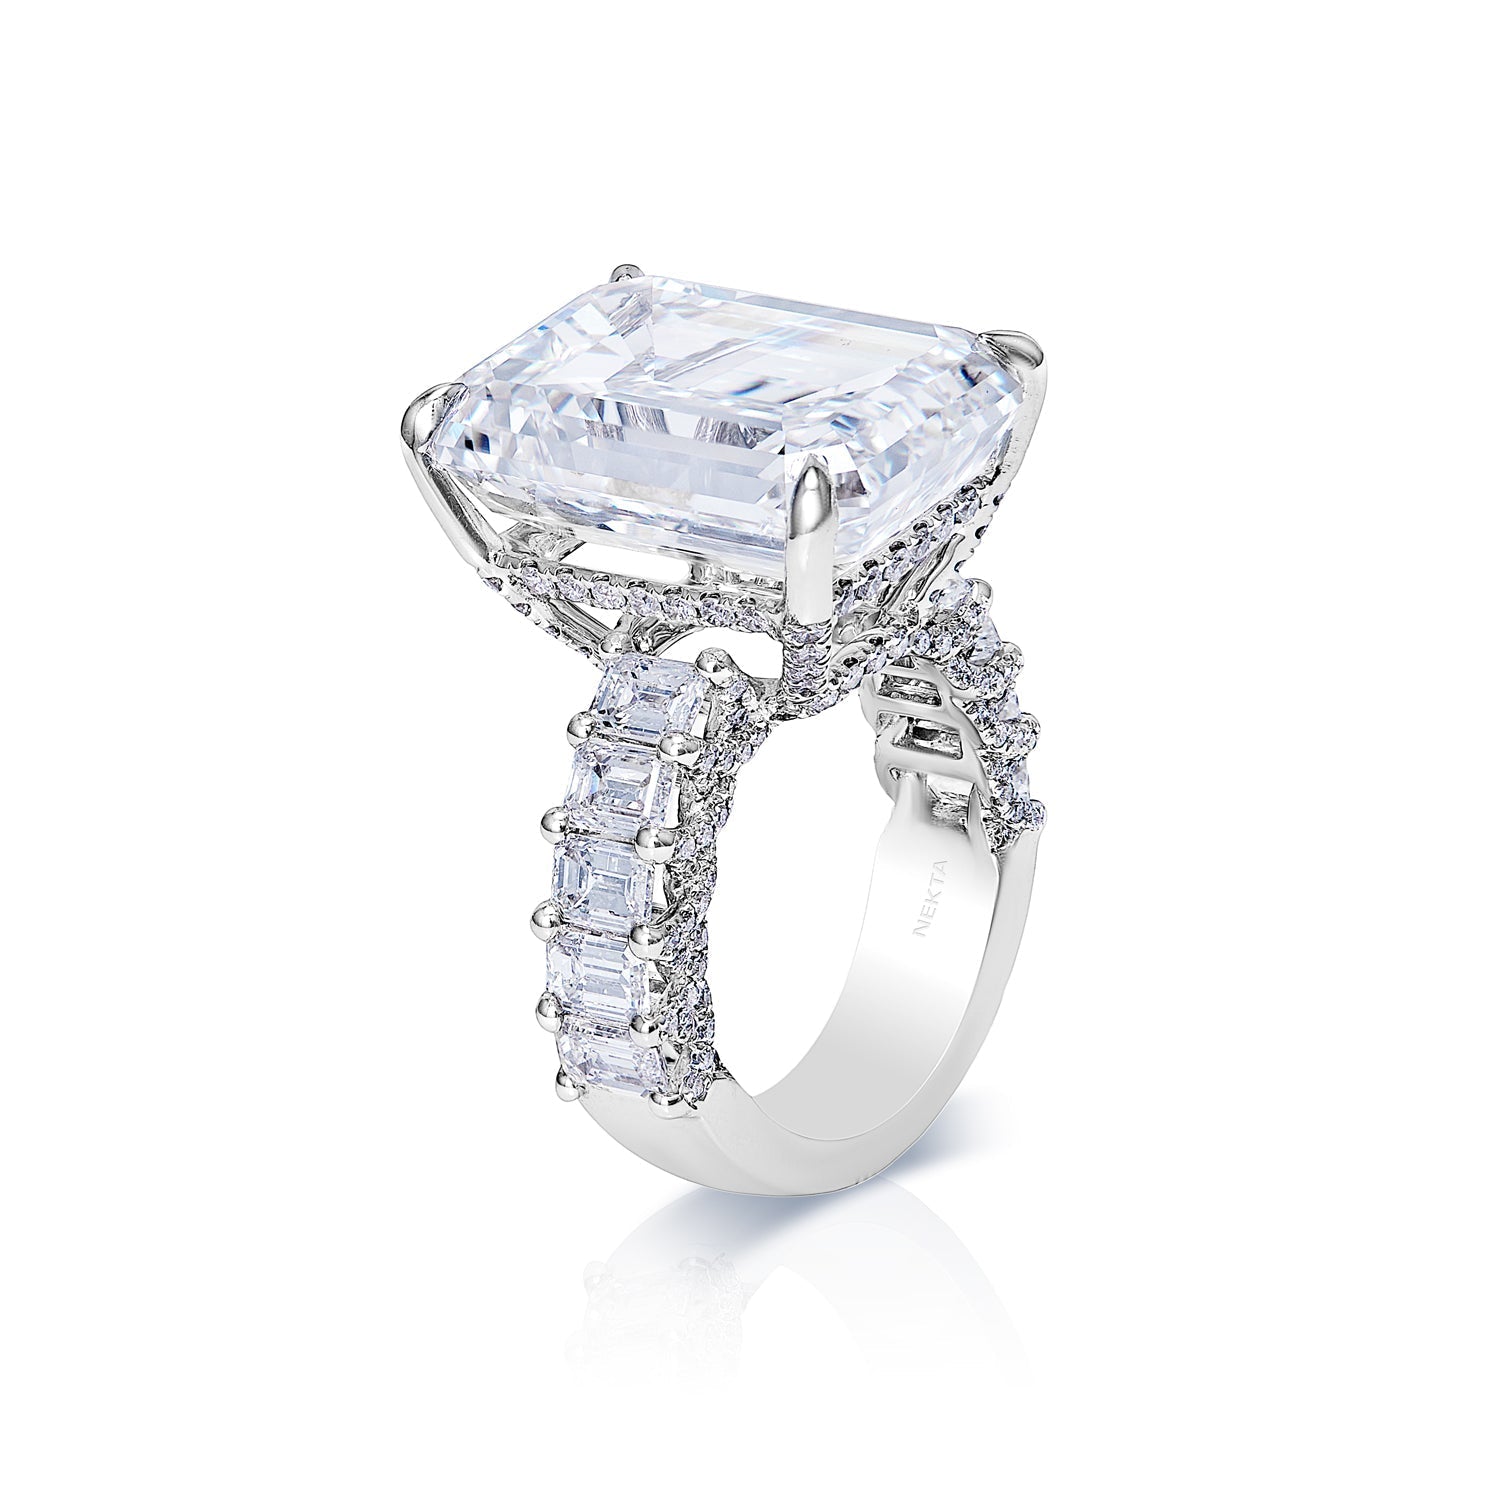 Leia 24 Carat F VS1 Emerald Cut Lab Grown Diamond Engagement Ring in White Gold Side View